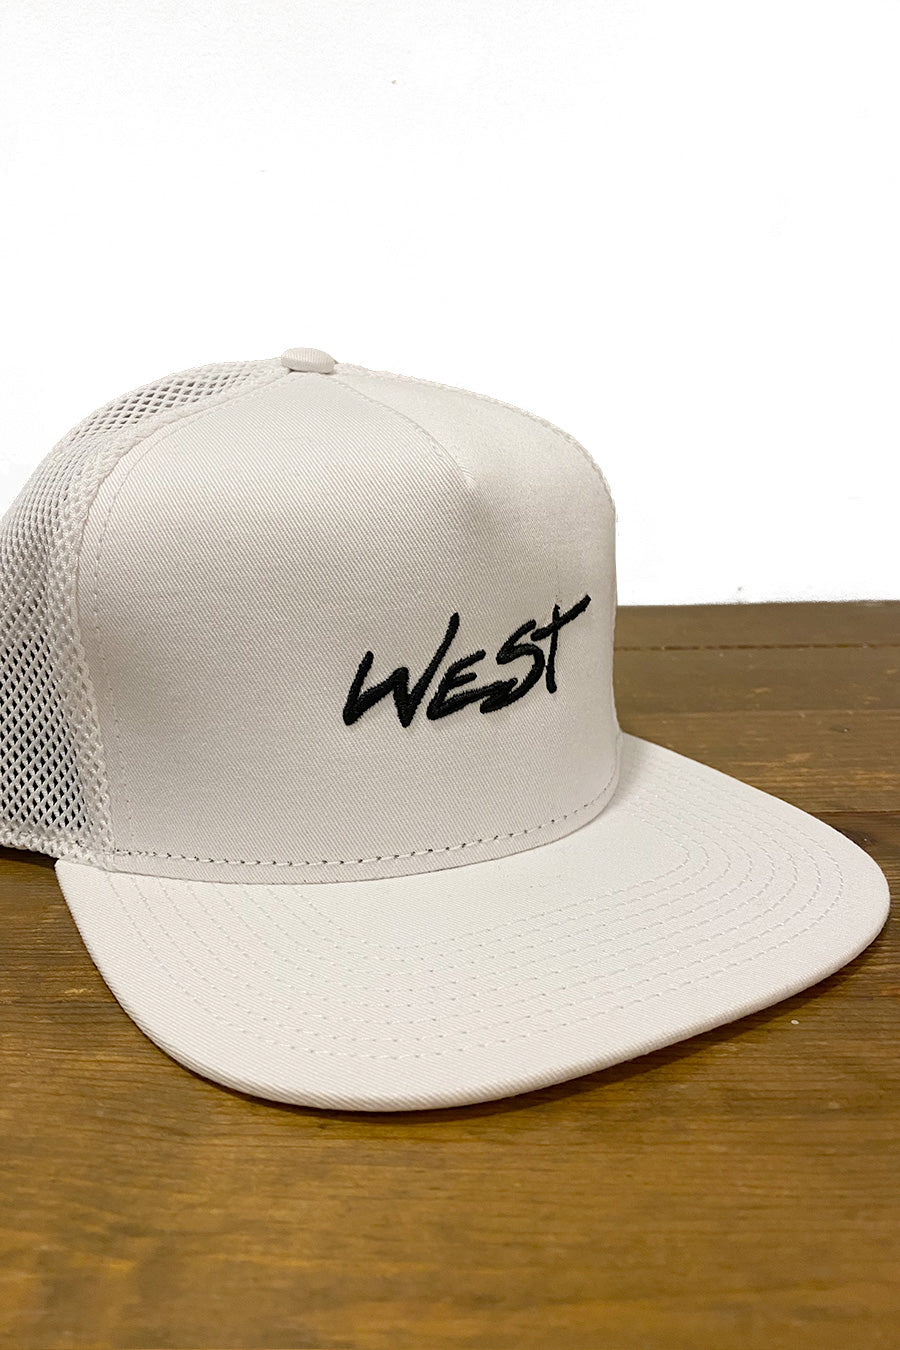 West Script Hat | White - Main Image Number 1 of 2